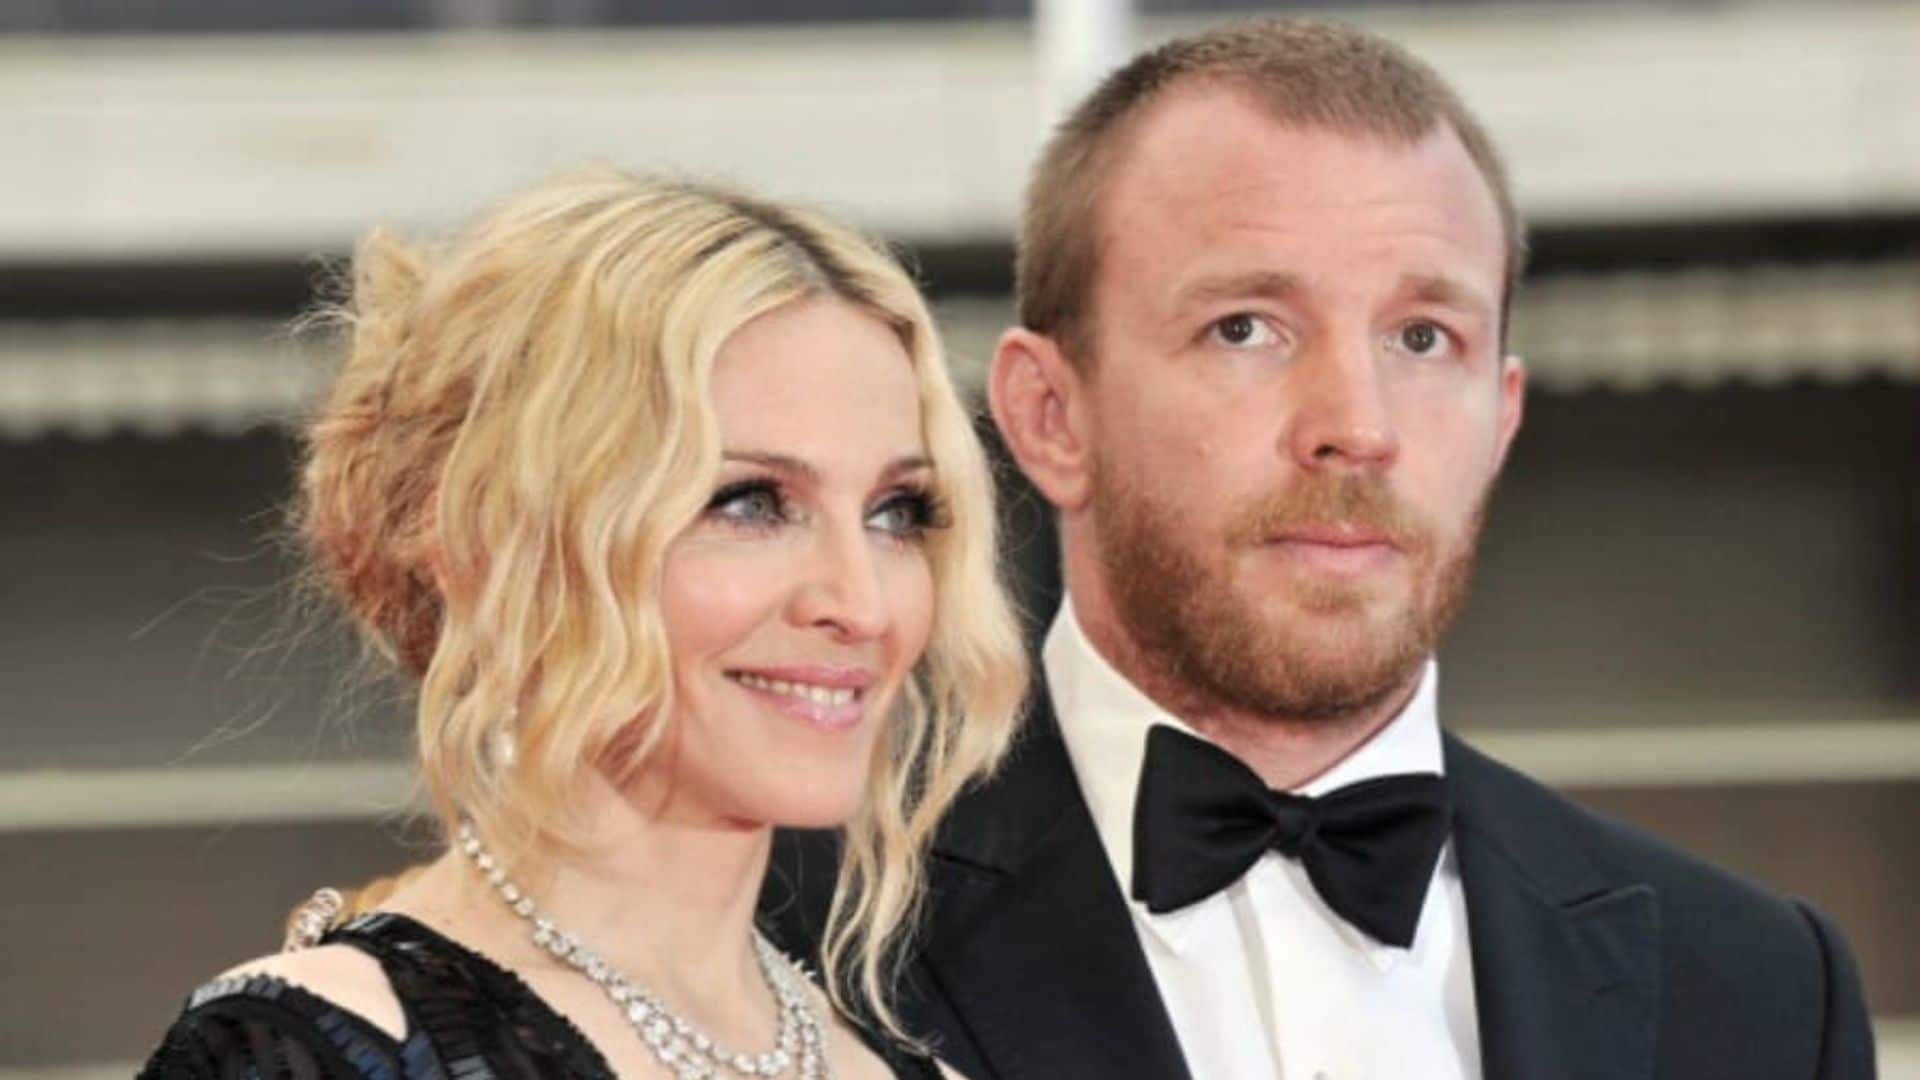 Guy Ritchie brings a bottle of wine as he visits Madonna's house